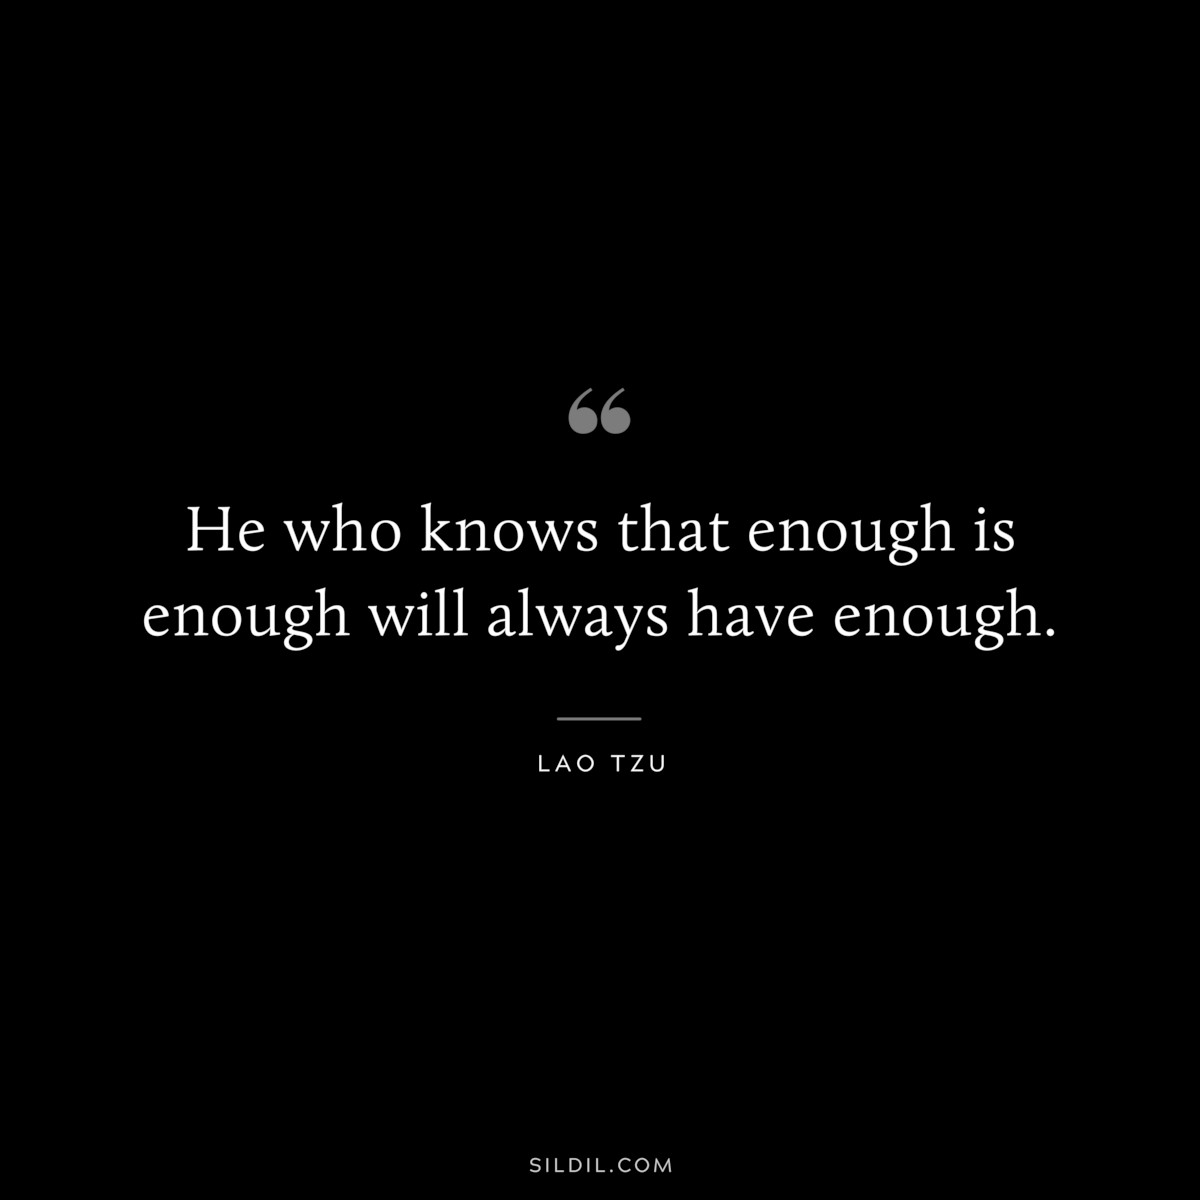 He who knows that enough is enough will always have enough. ― Lao Tzu